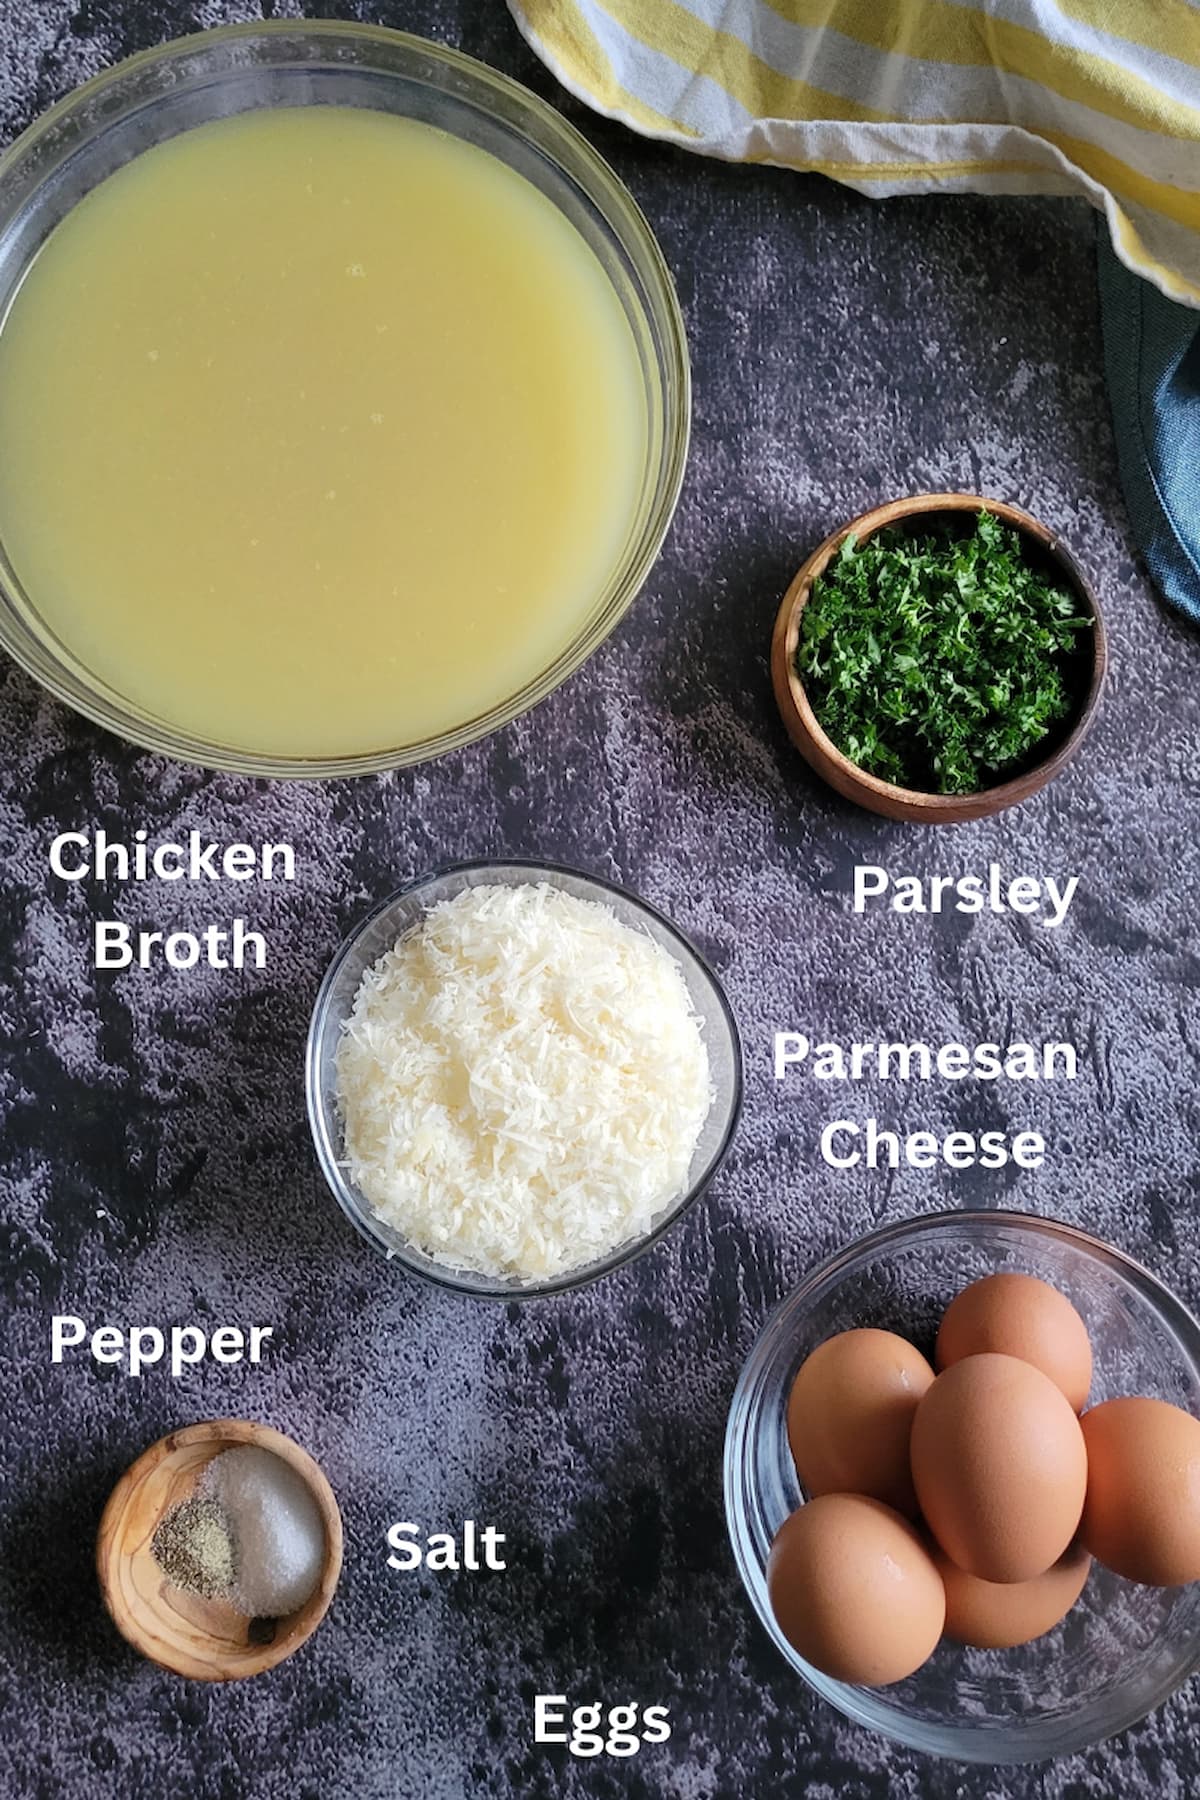 ingredients for soup with eggs - eggs, chicken broth, parsley, salt, pepper, parmesan cheese